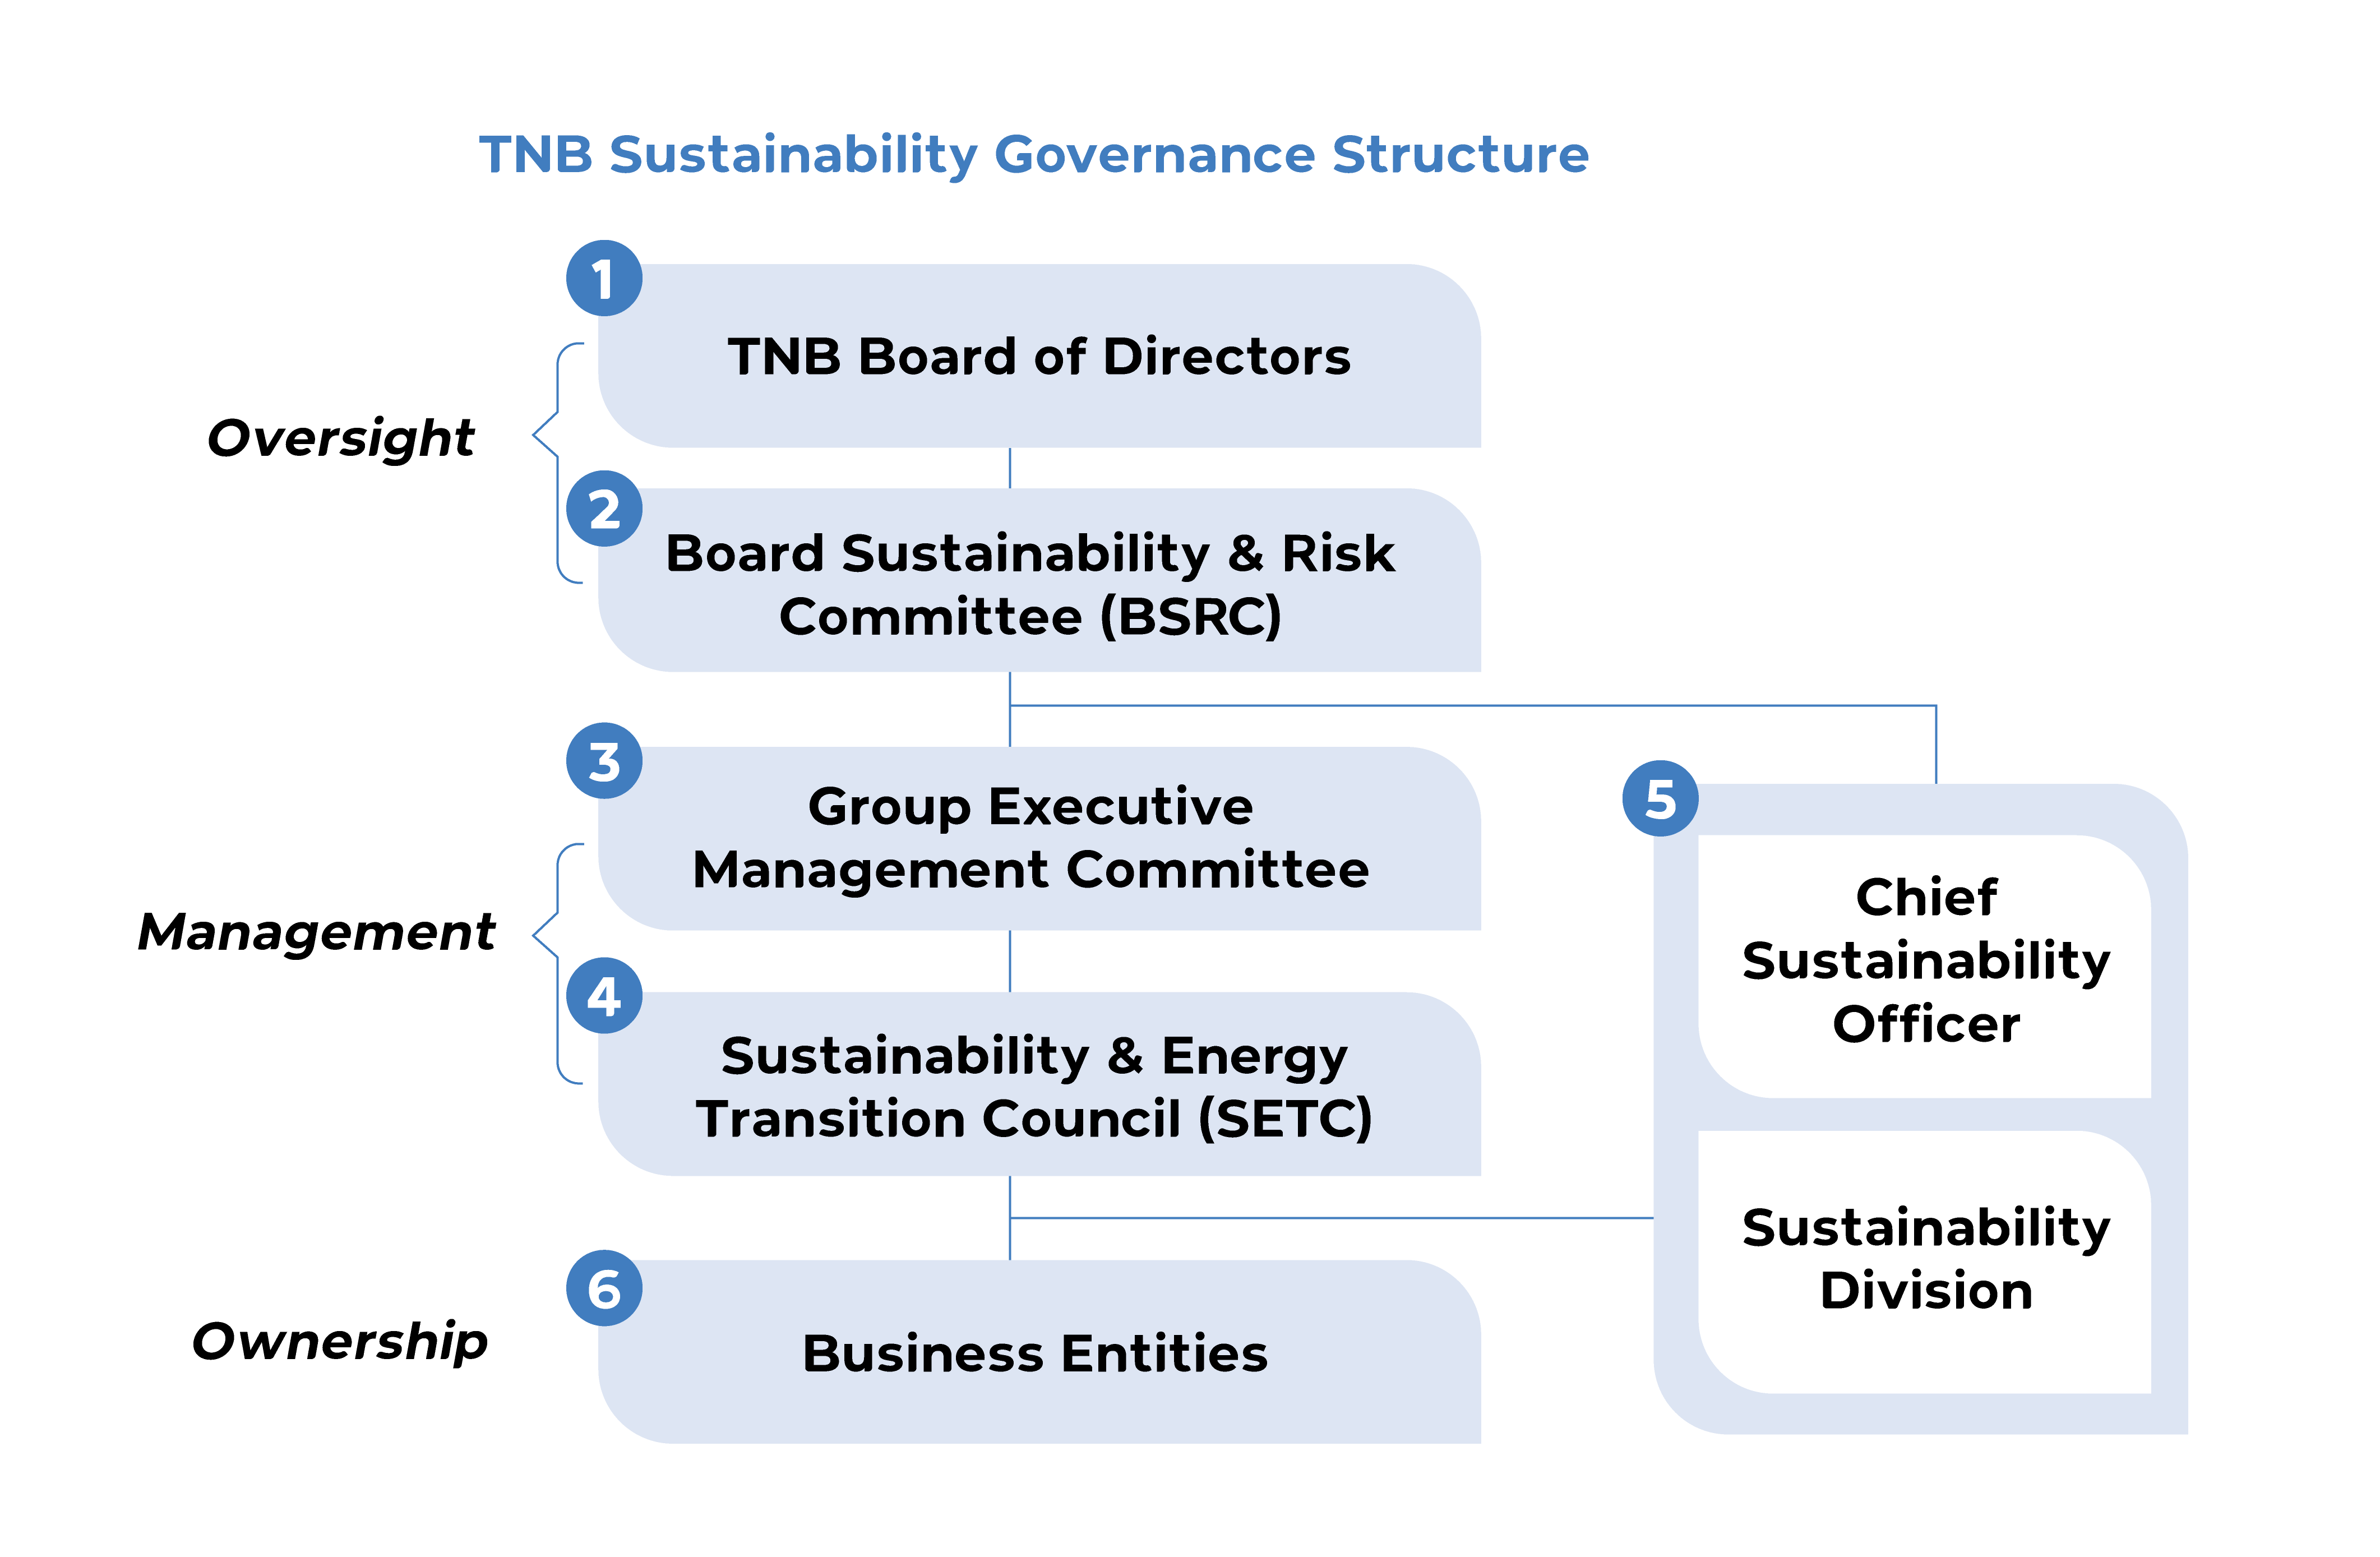 TNB Sustainability Governance Structure